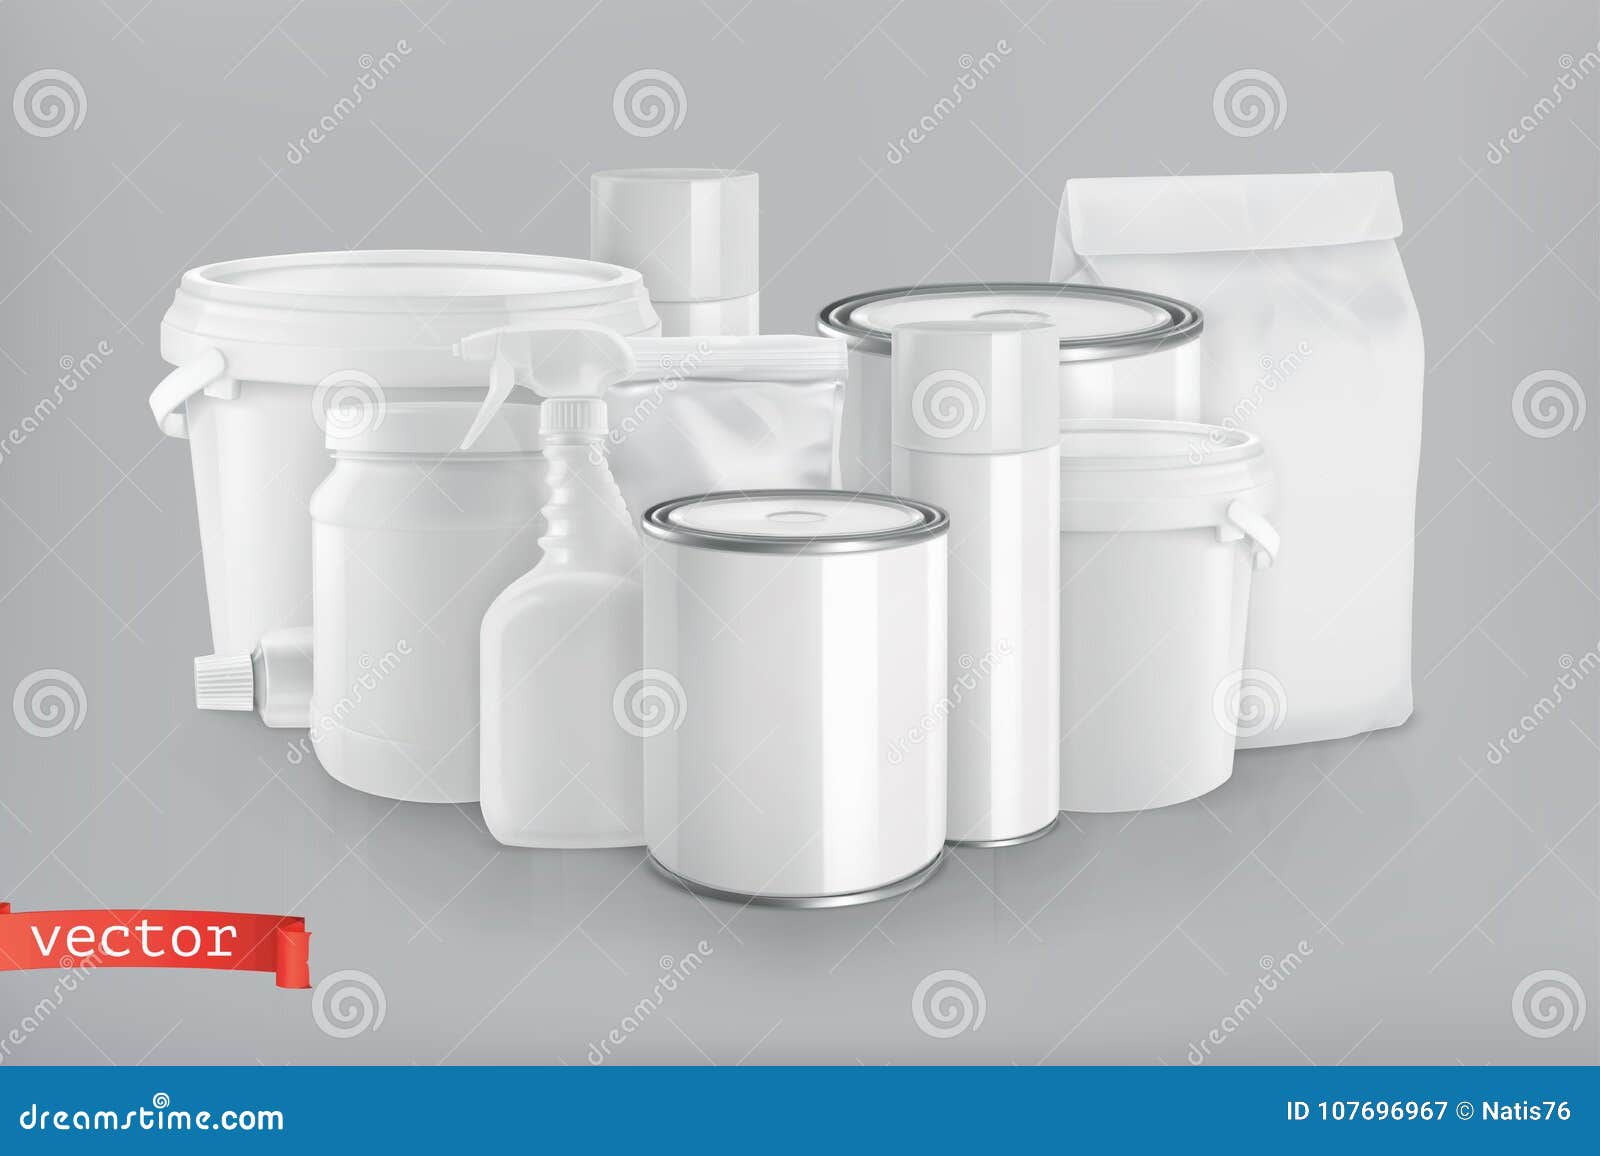 packaging building and sanitary. white plastic, metal and paper pack.  group